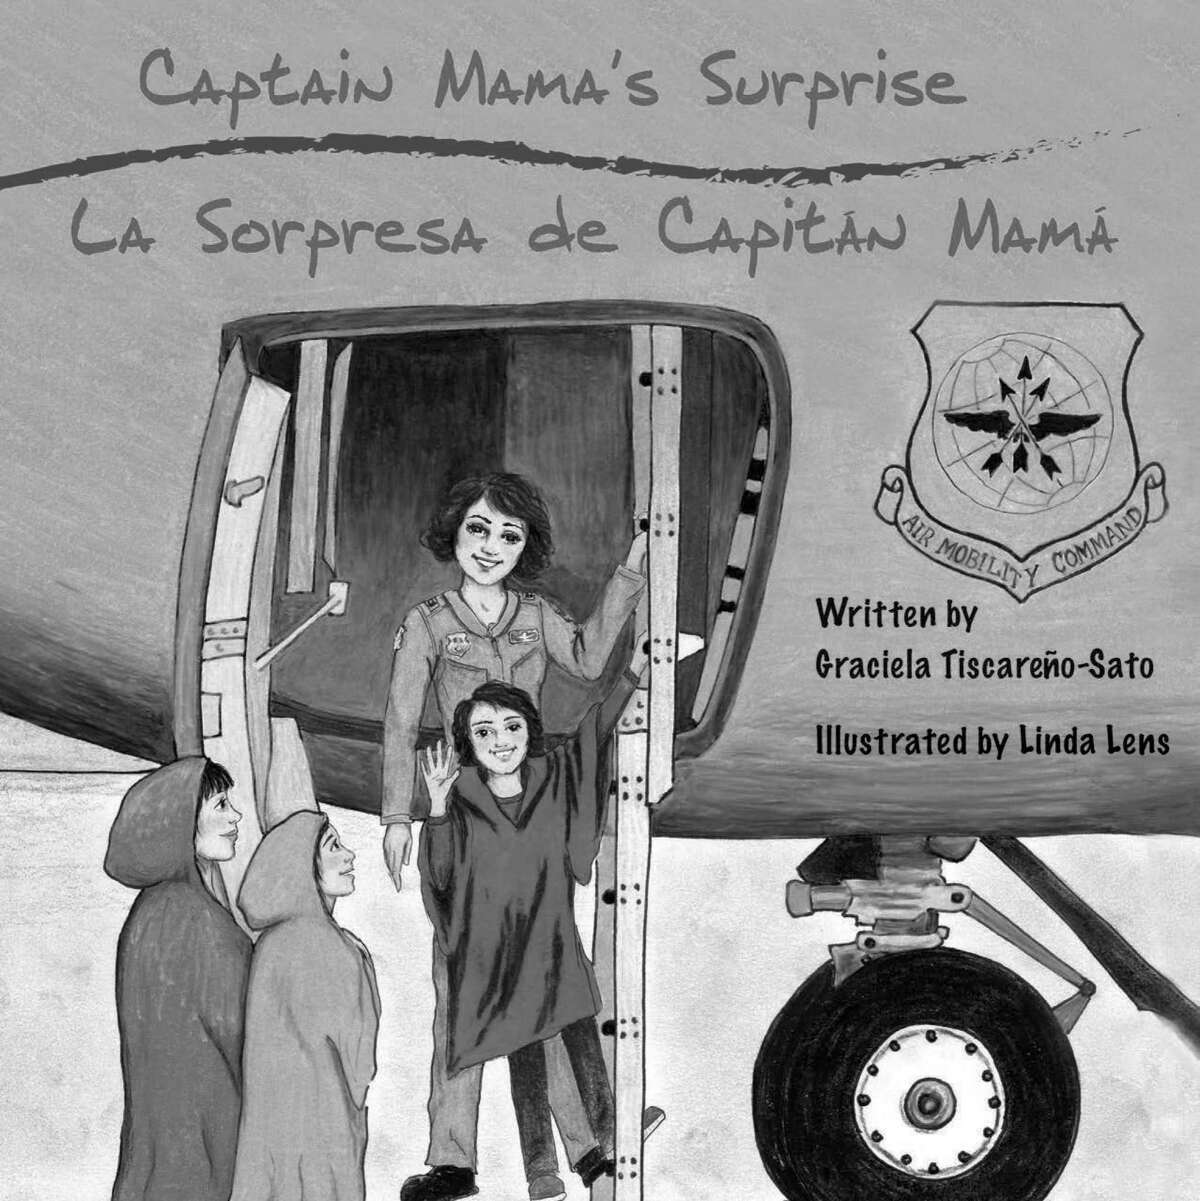 Retired Air Force navigator Graciela Tiscareno-Sato, who was honored by President Barack Obama as a 2014 White House Champion of Change, is author of a children’s book series that features her character, “Capitán Mamá.” This illustration is from her latest book, “Captain Mama’s Surprise/La Sorpresa de Capitán Mamá.”